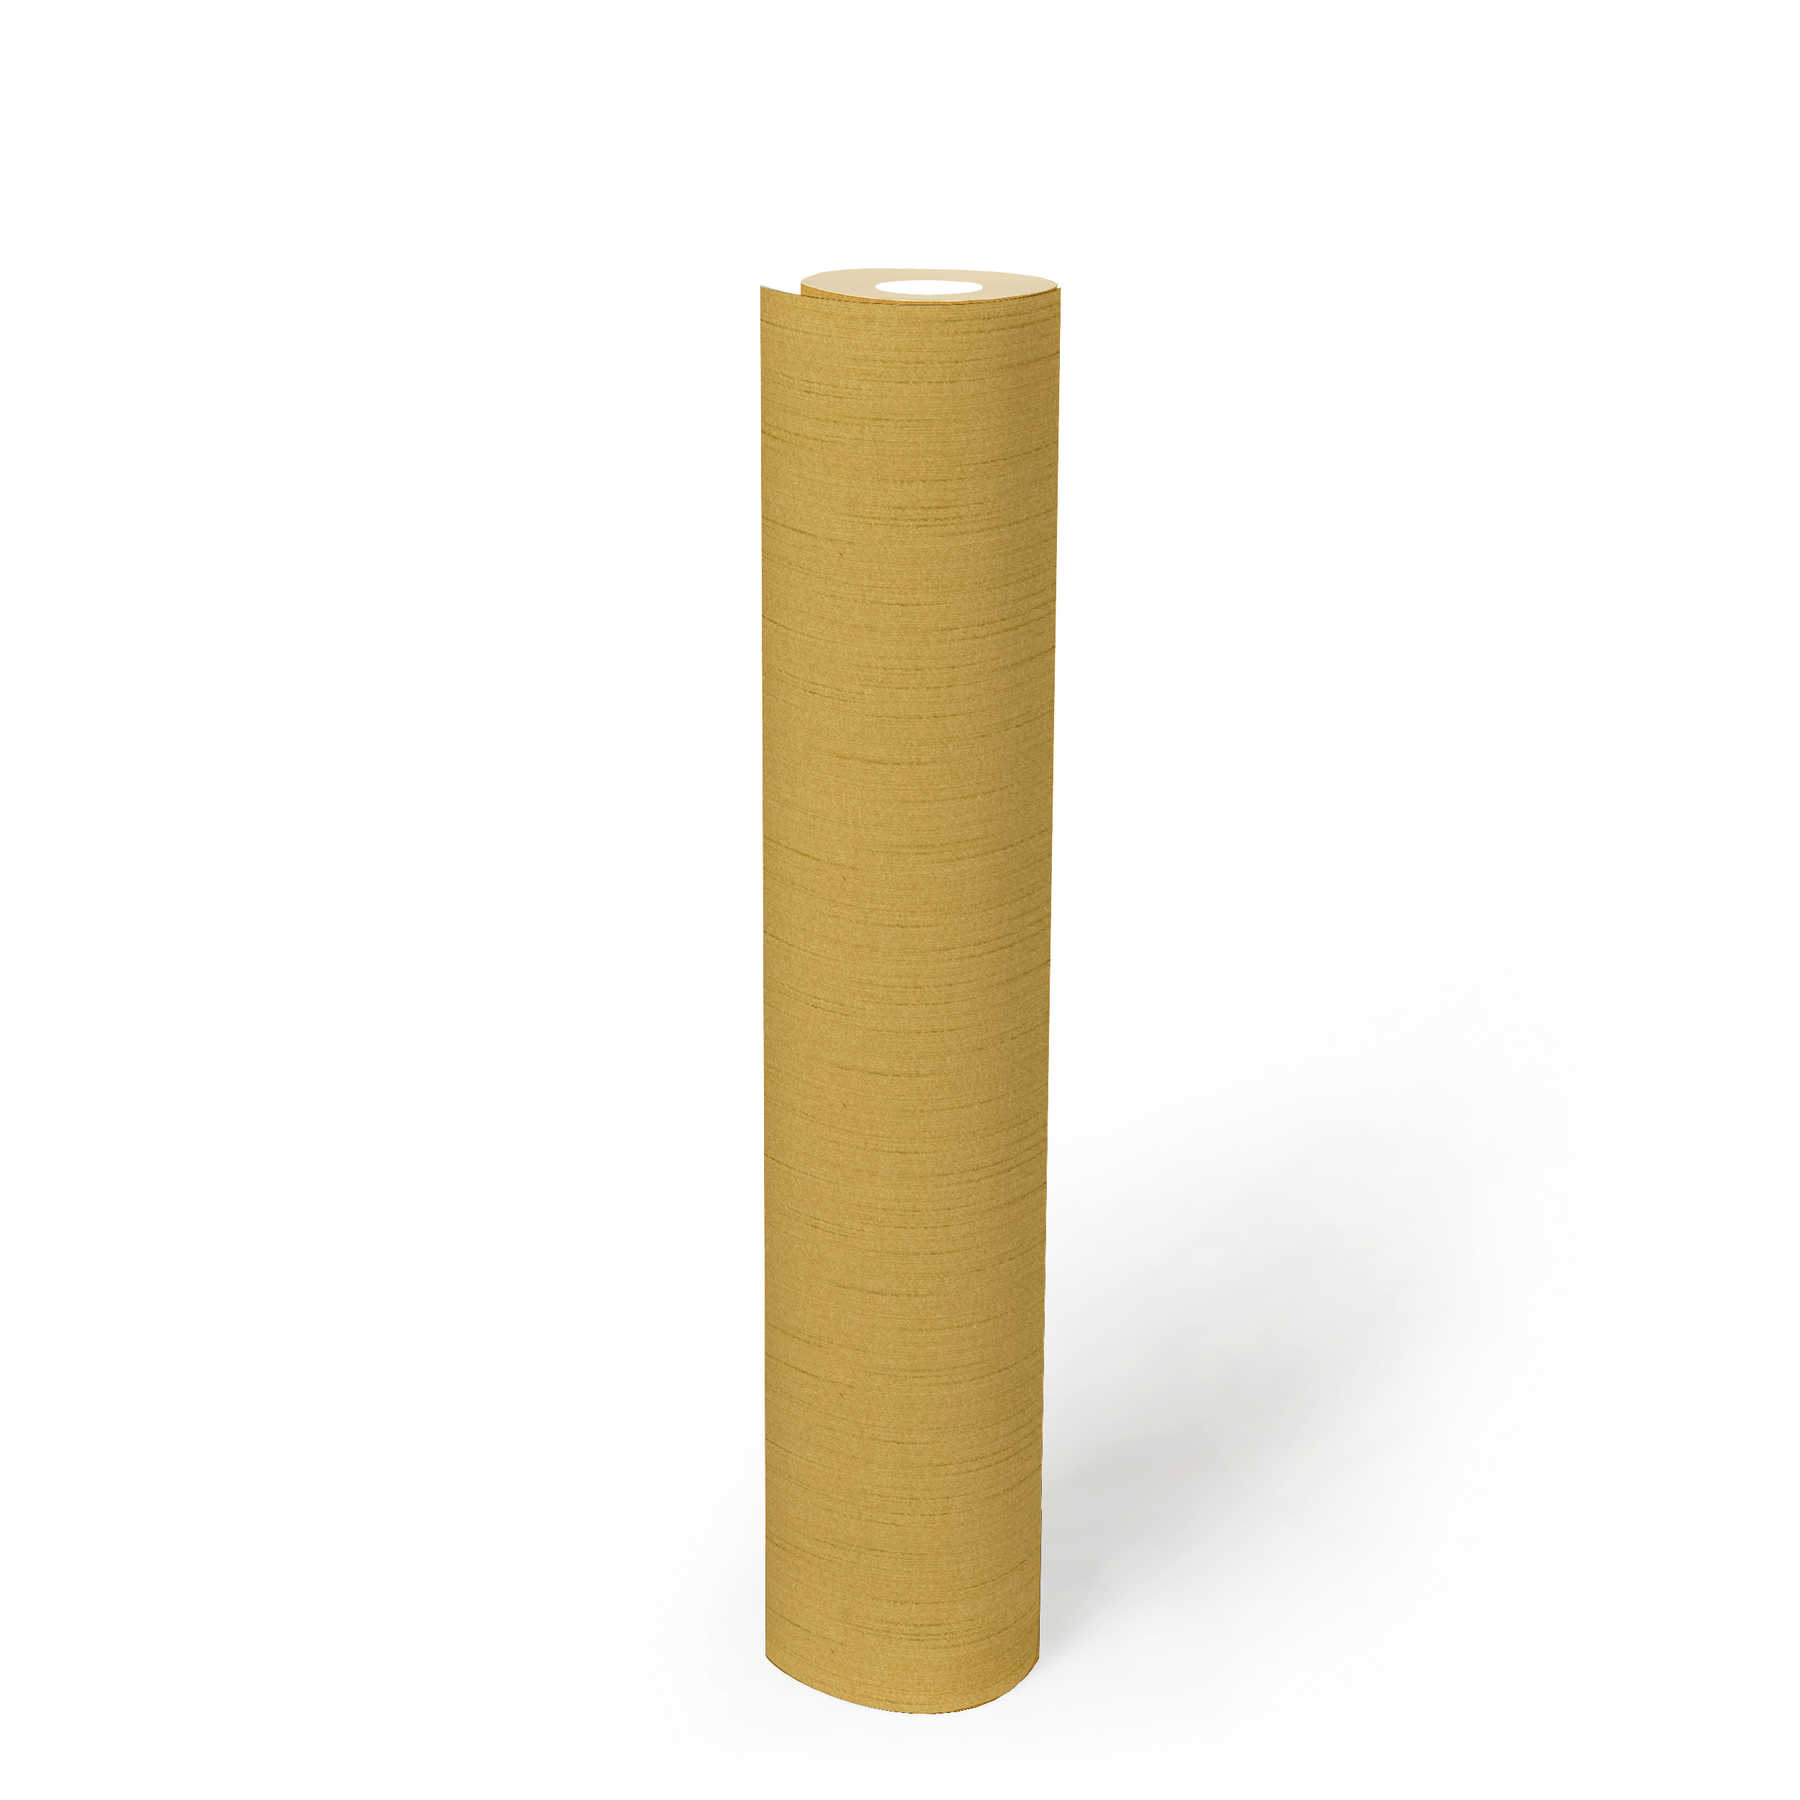             Mustard yellow wallpaper non-woven with mottled pattern - yellow
        